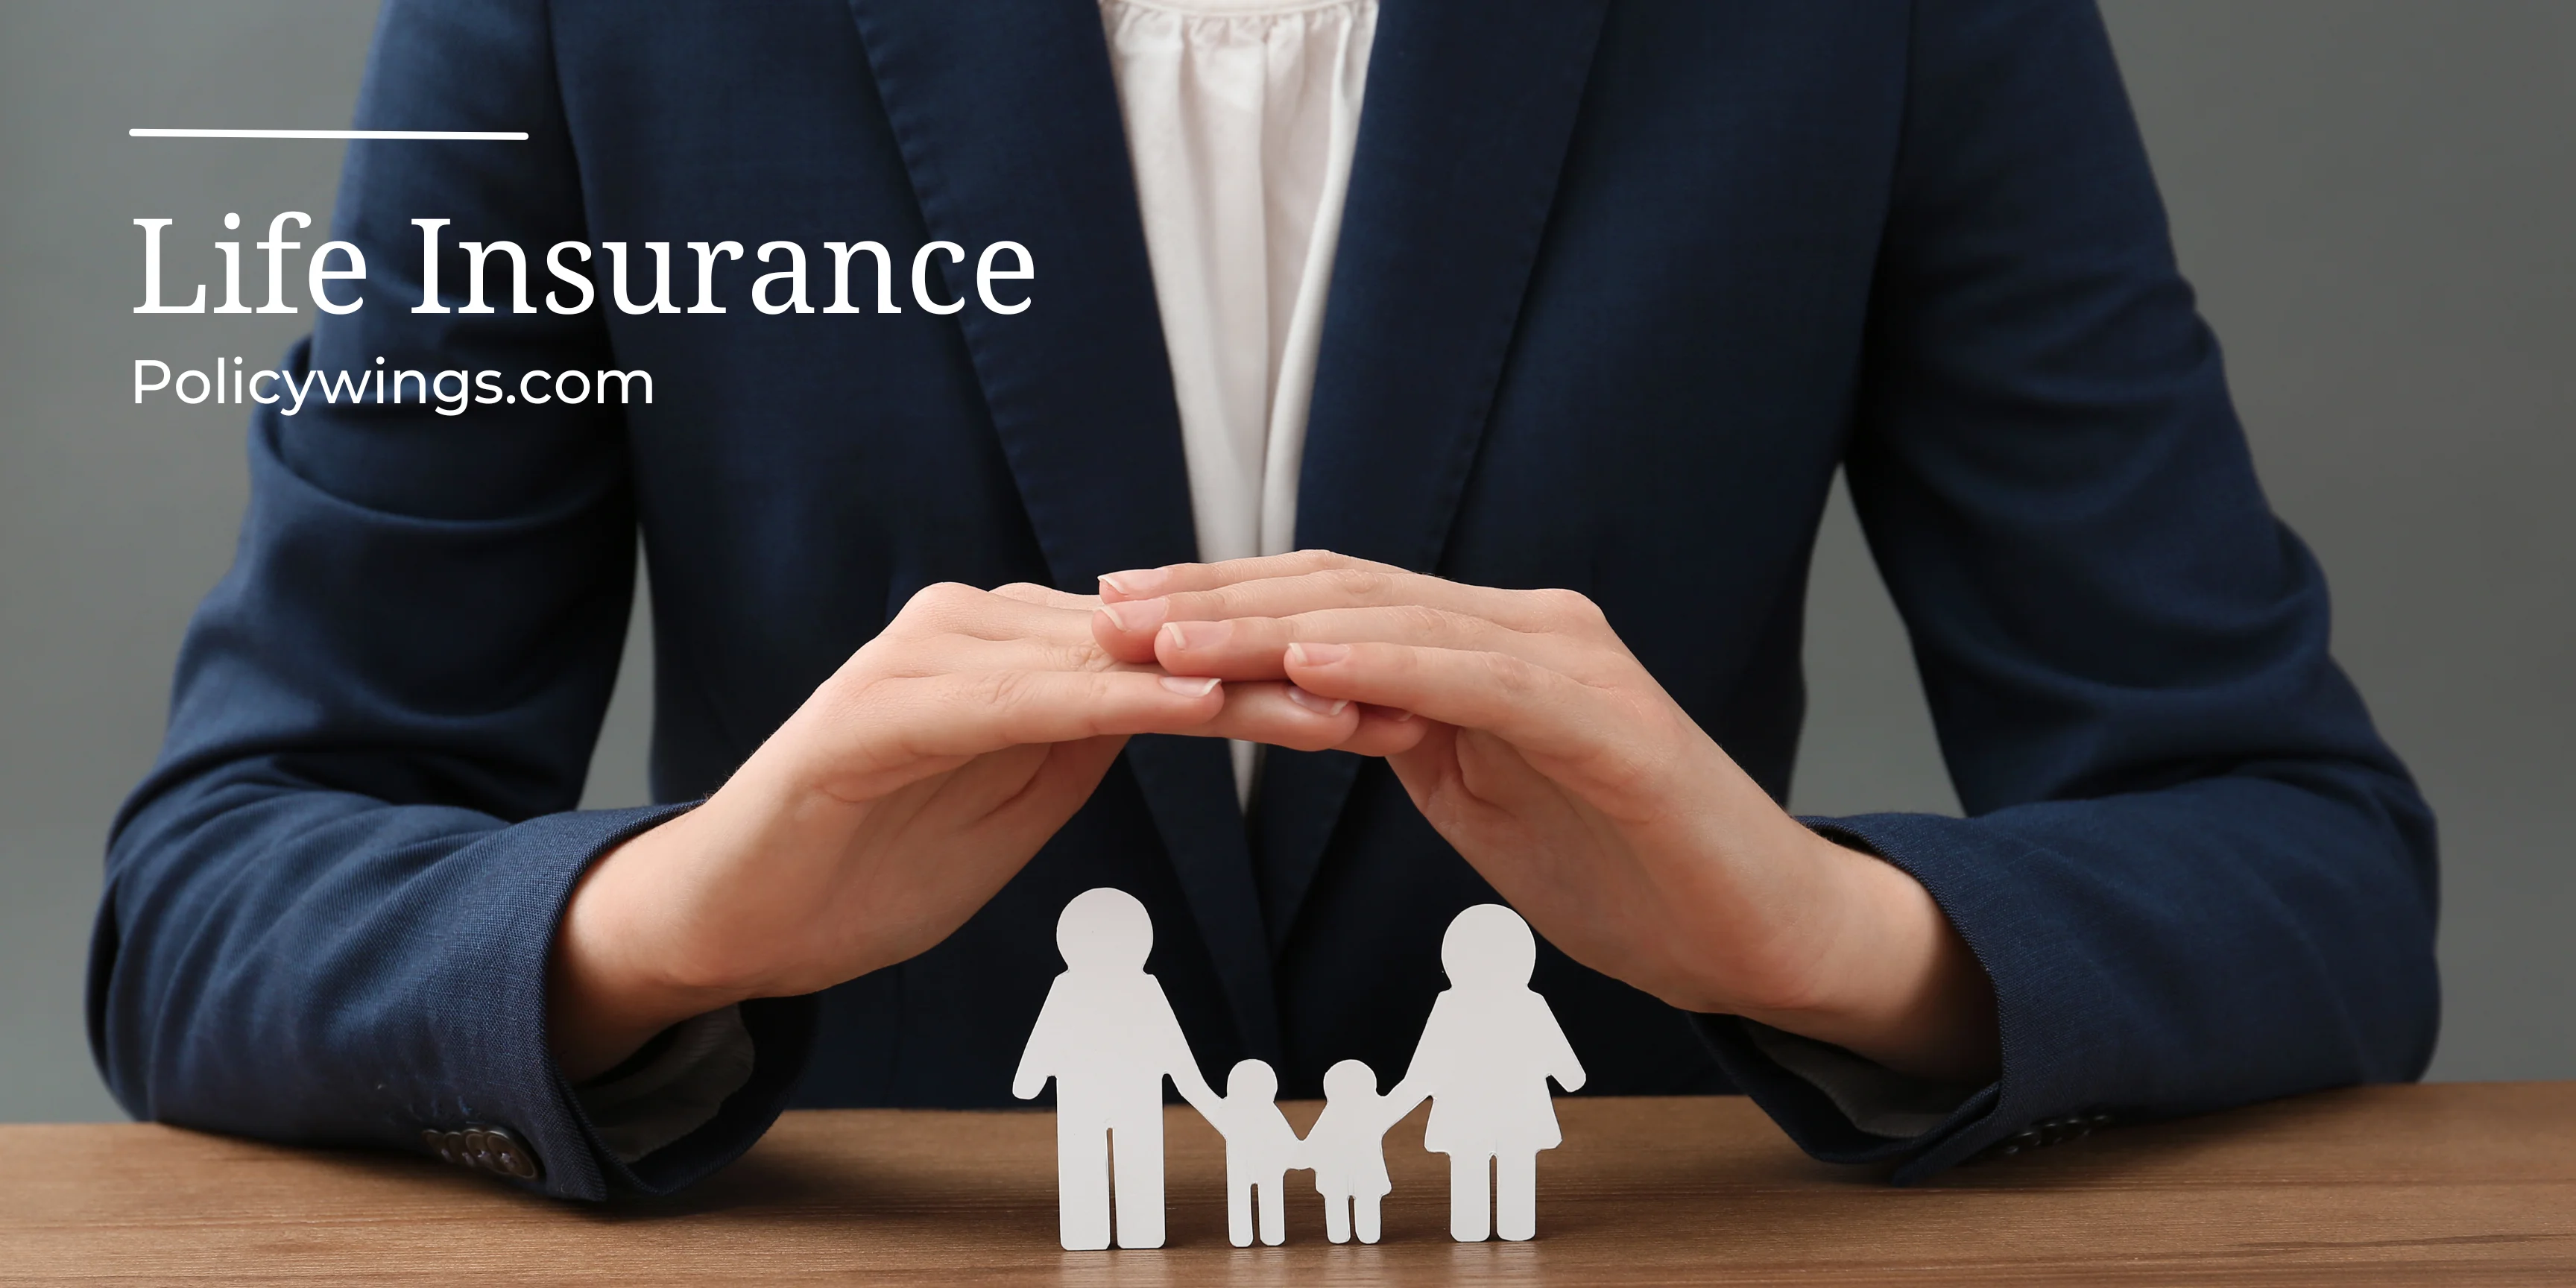 Health insurance and life insurance